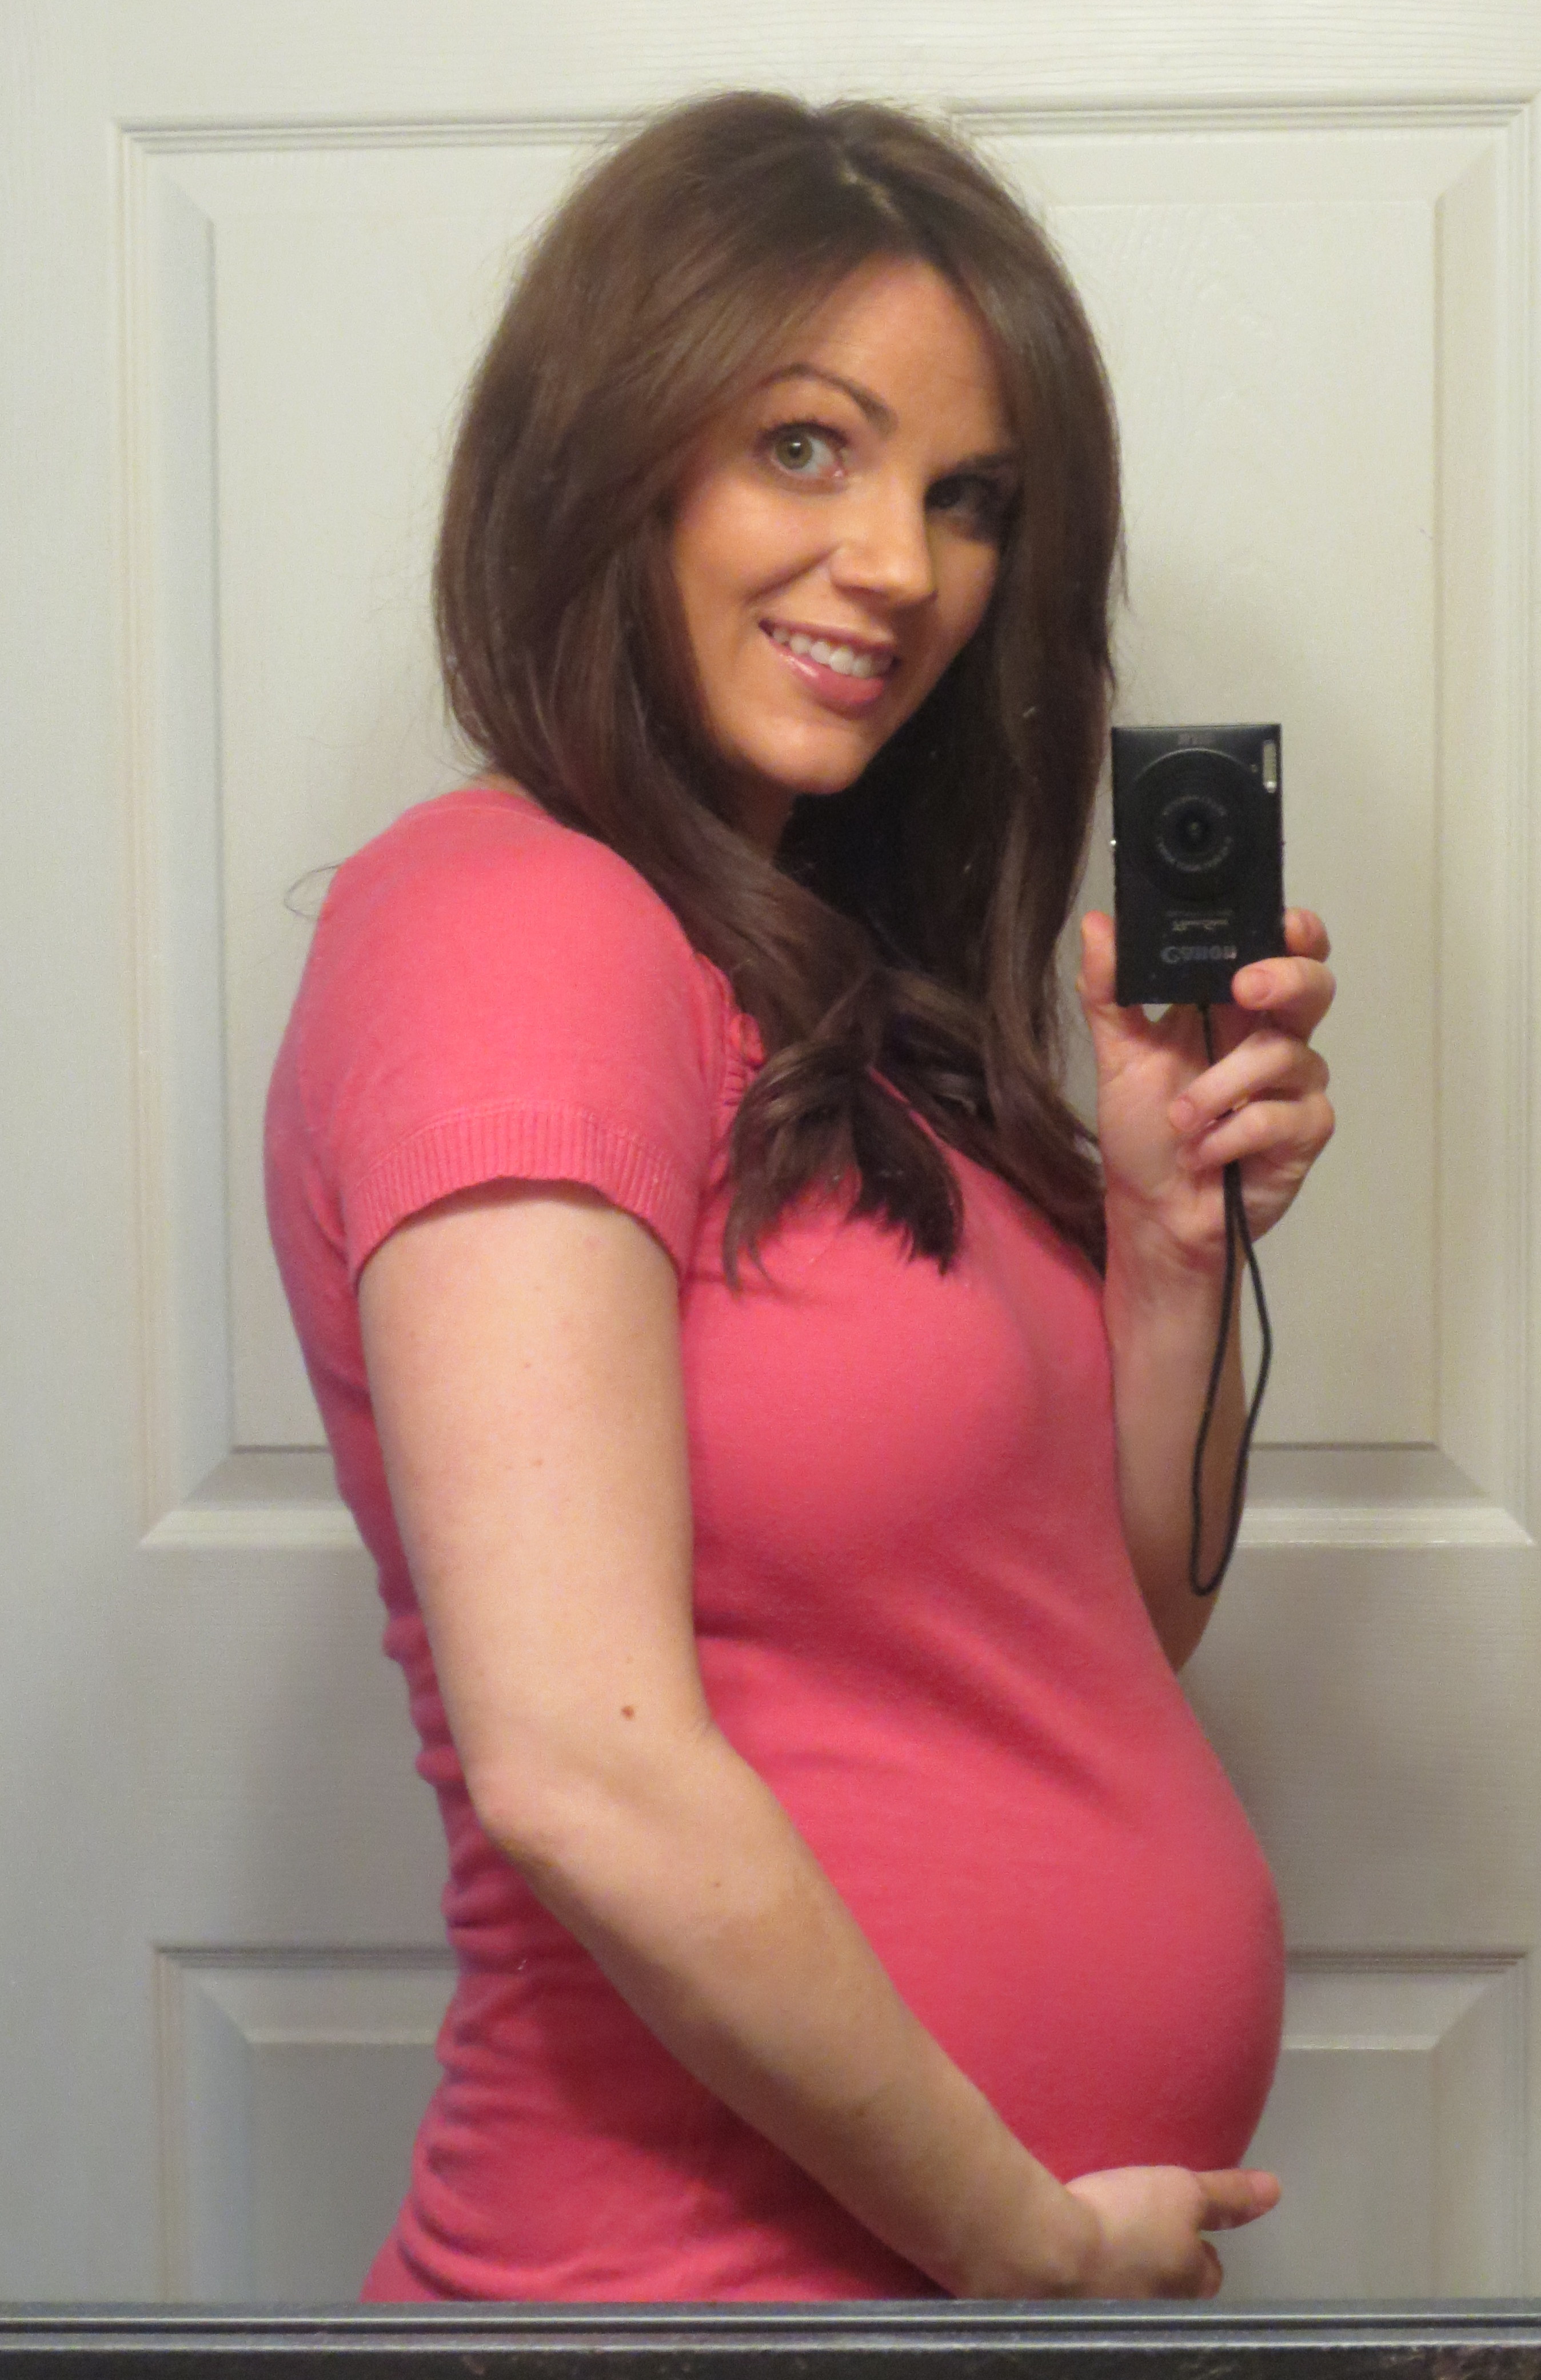 21 weeks with twins